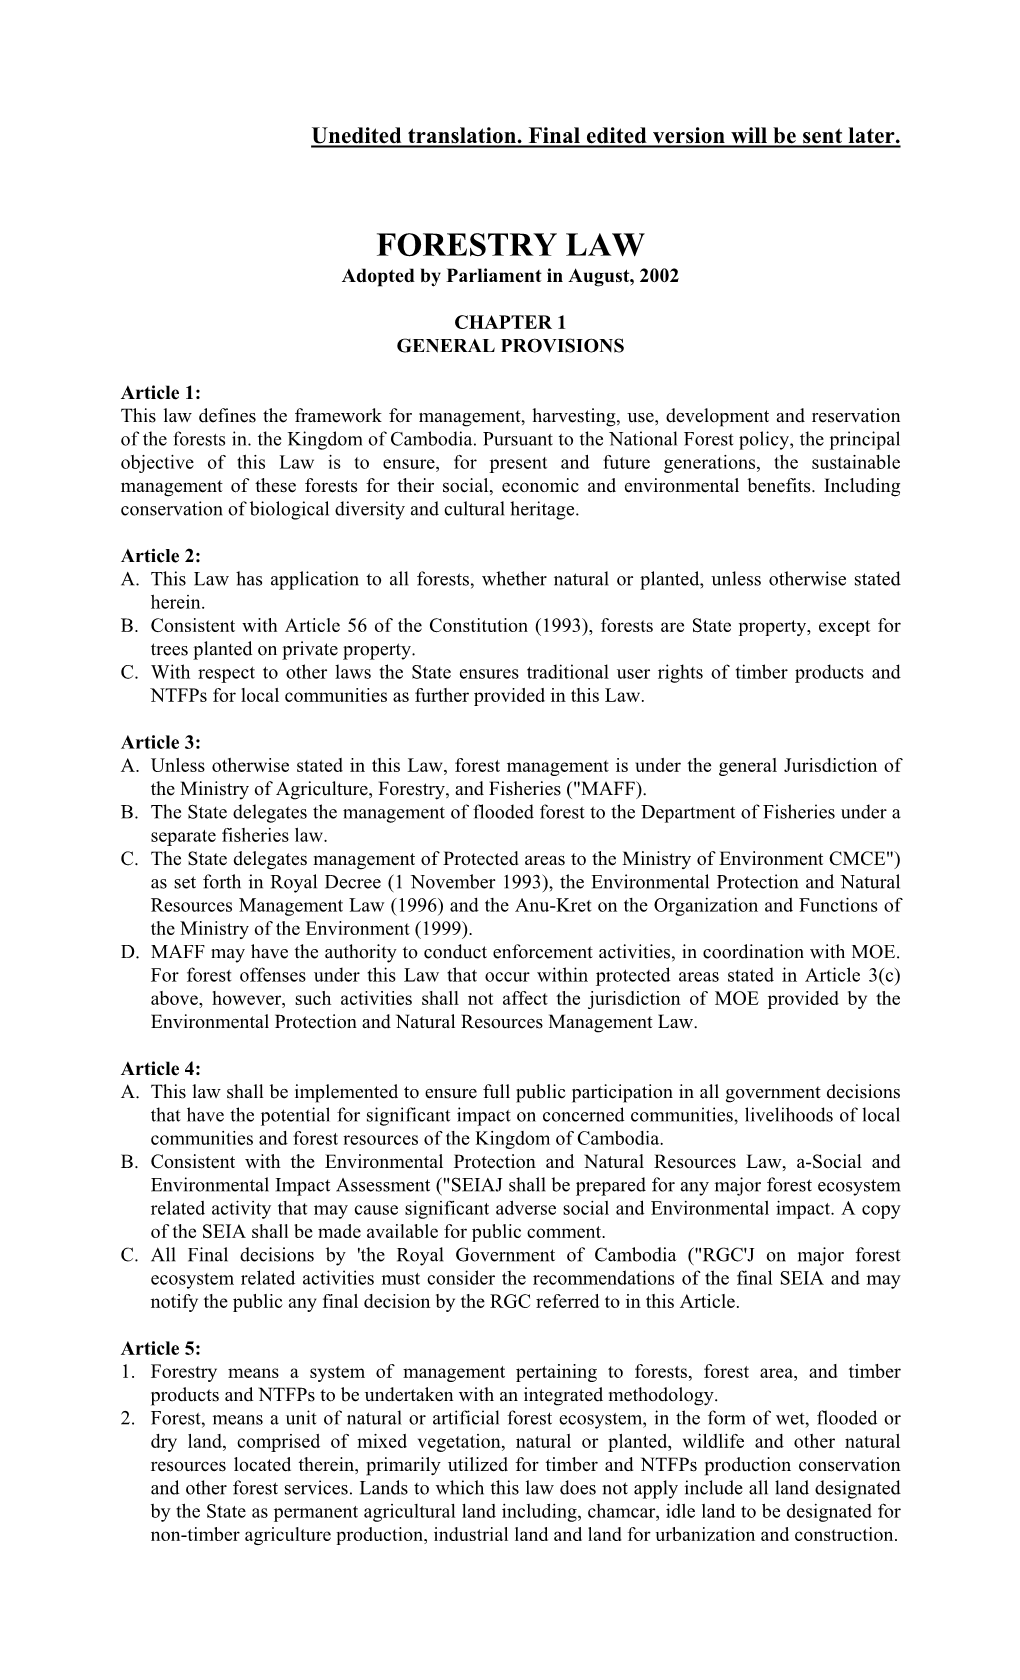 FORESTRY LAW Adopted by Parliament in August, 2002